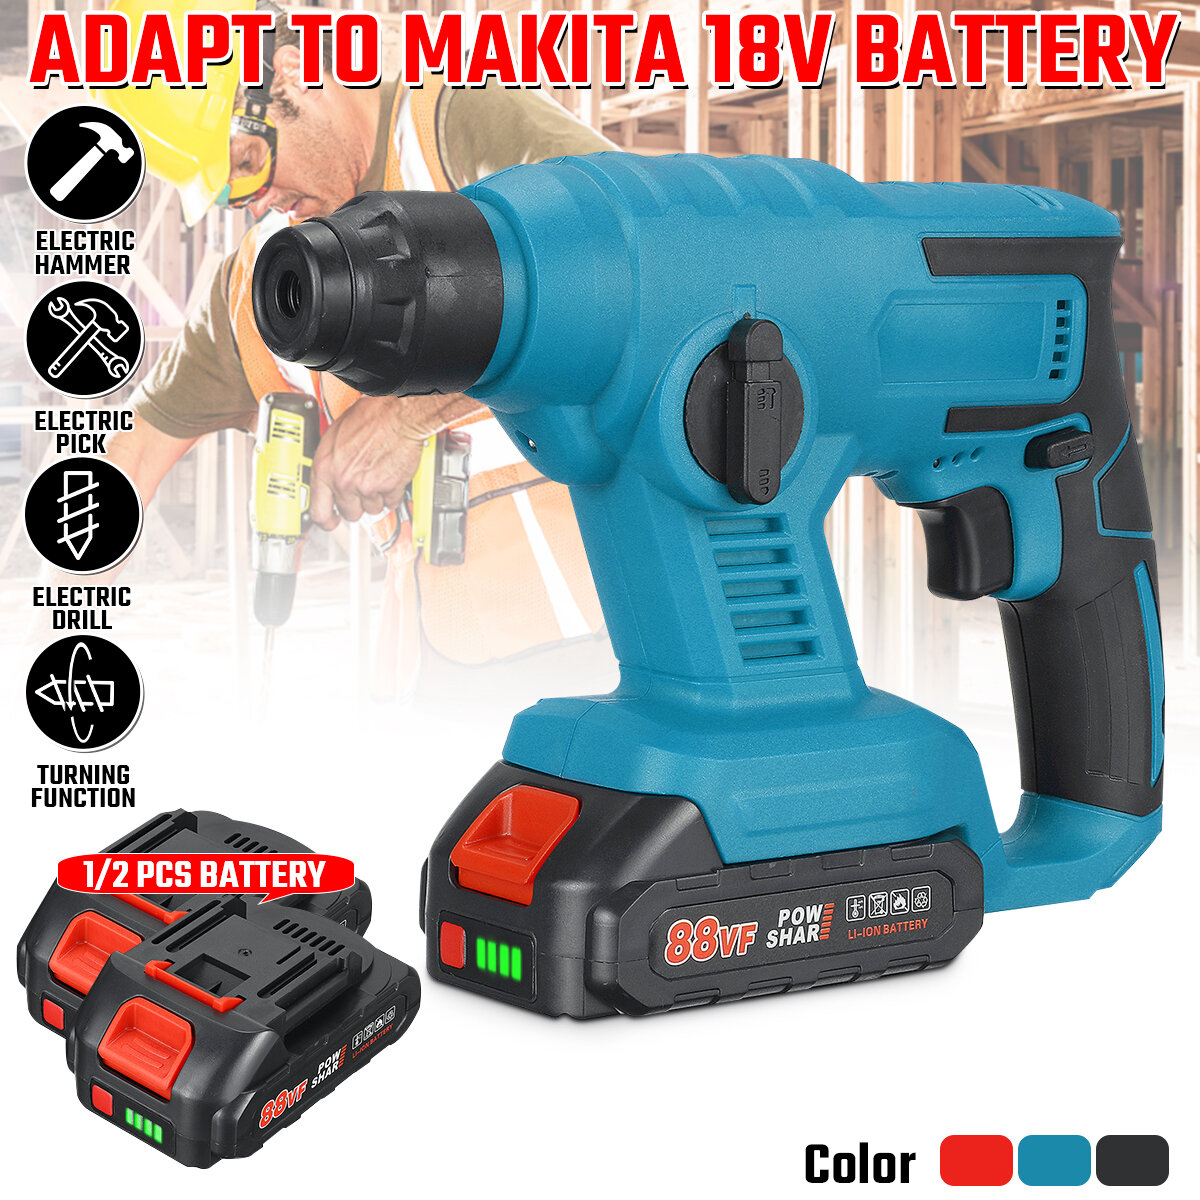 Image of 88VF 1800rpm Cordless Brushless Rotary Hammer Drill Fit 18VMakita Battery